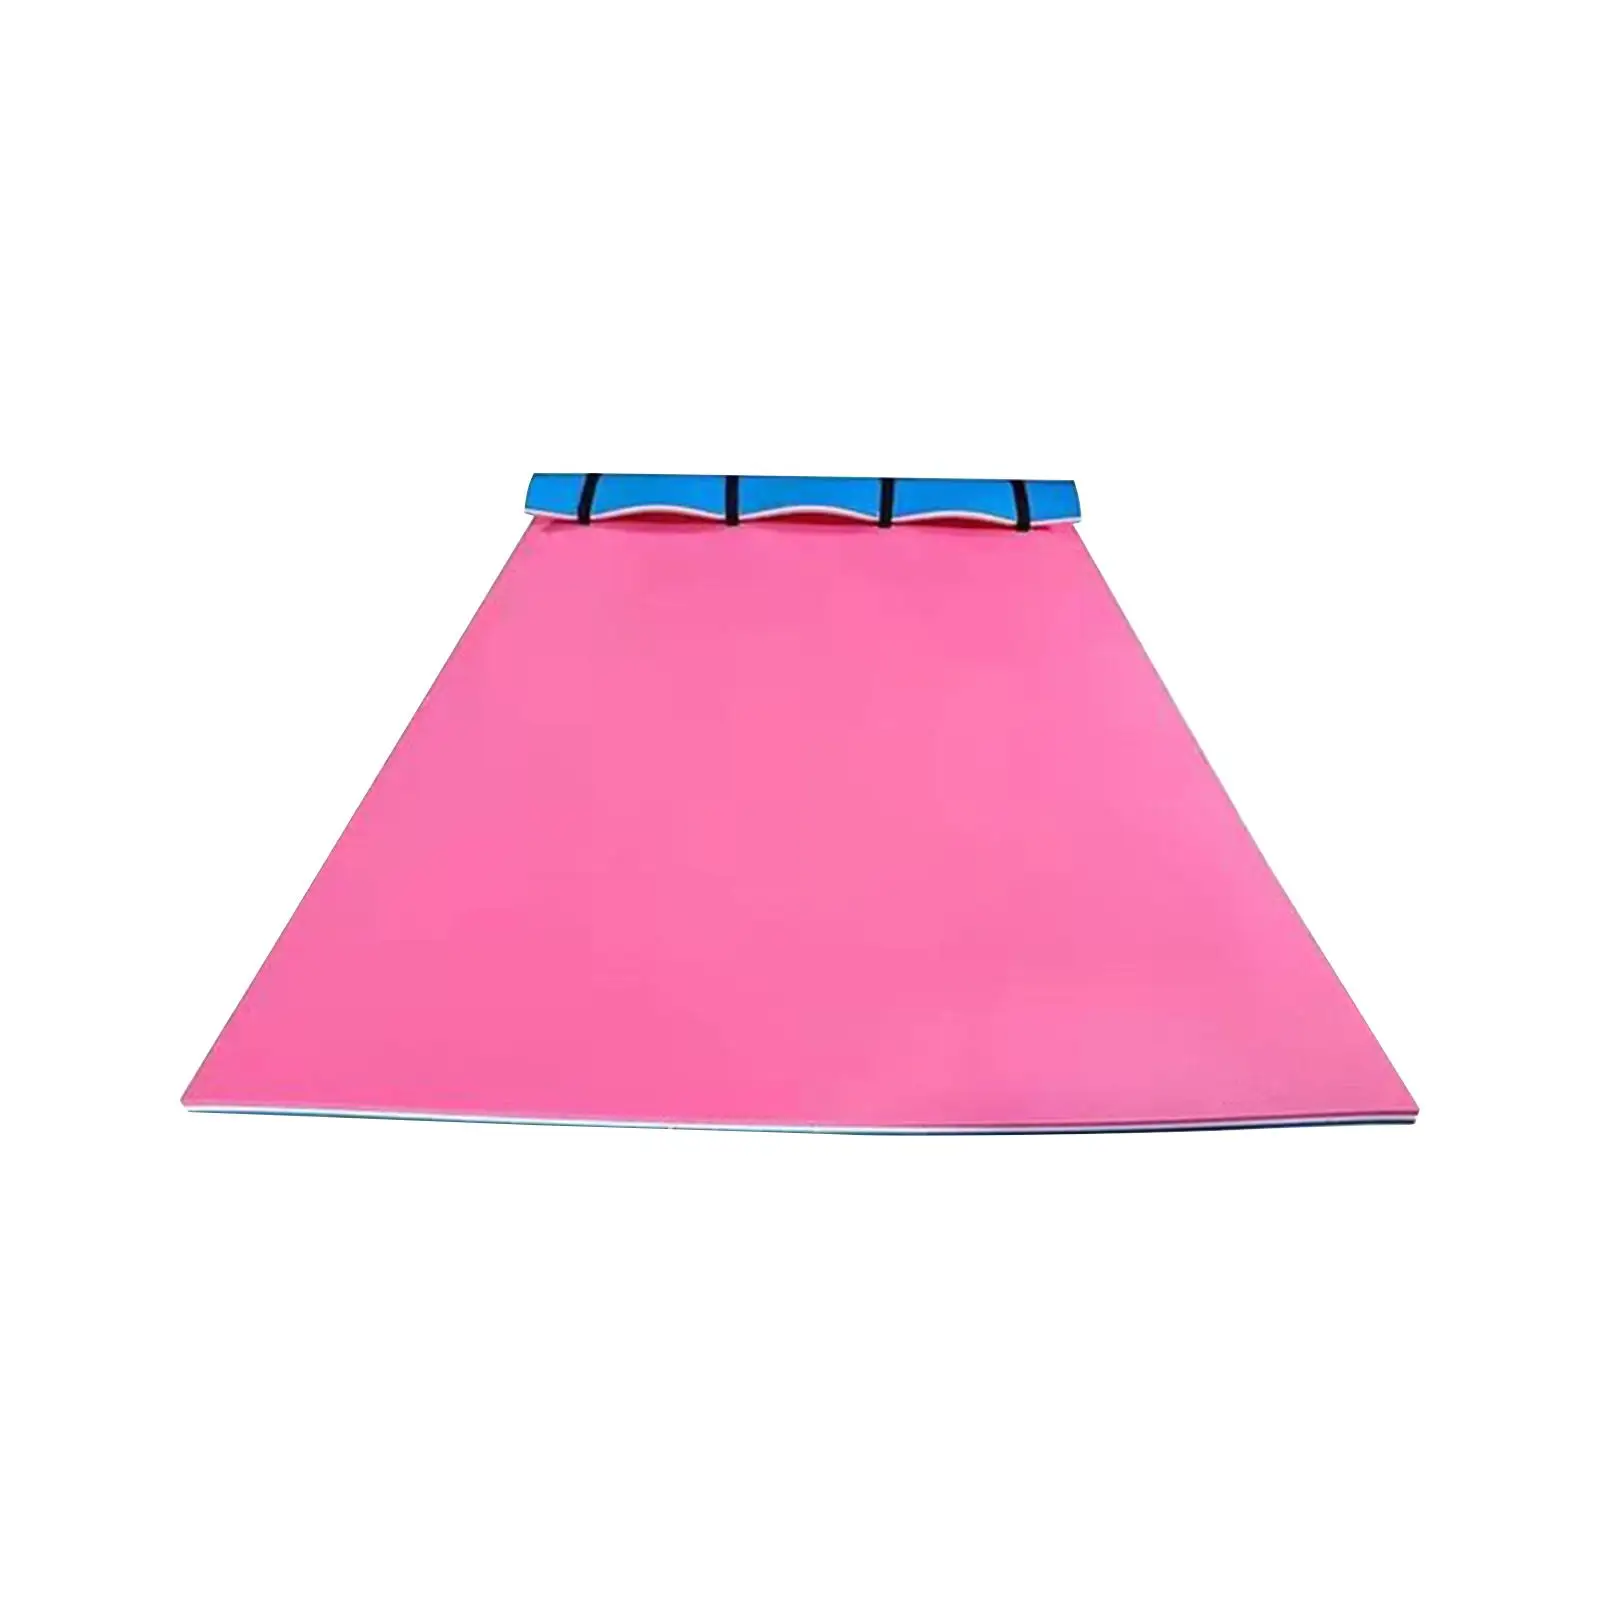 Floating Mat Water Cushion Pad 3 Layer 106x35.4x1.3inch Lightweight Sturdy for River Swimming Pool Summer Water Bed Xpe Foam Mat